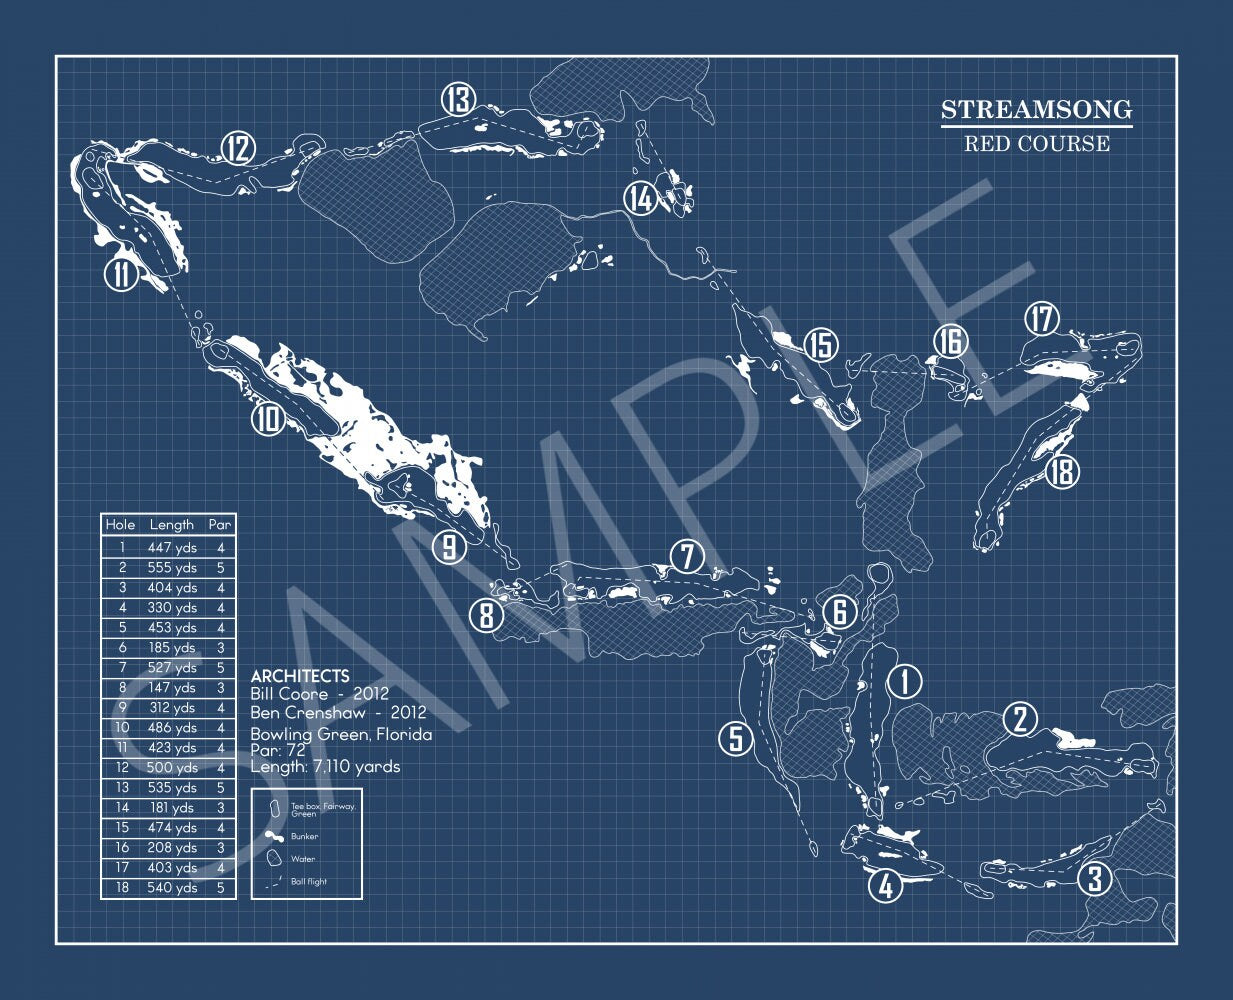 Streamsong Red Golf Course Blueprint (Print)